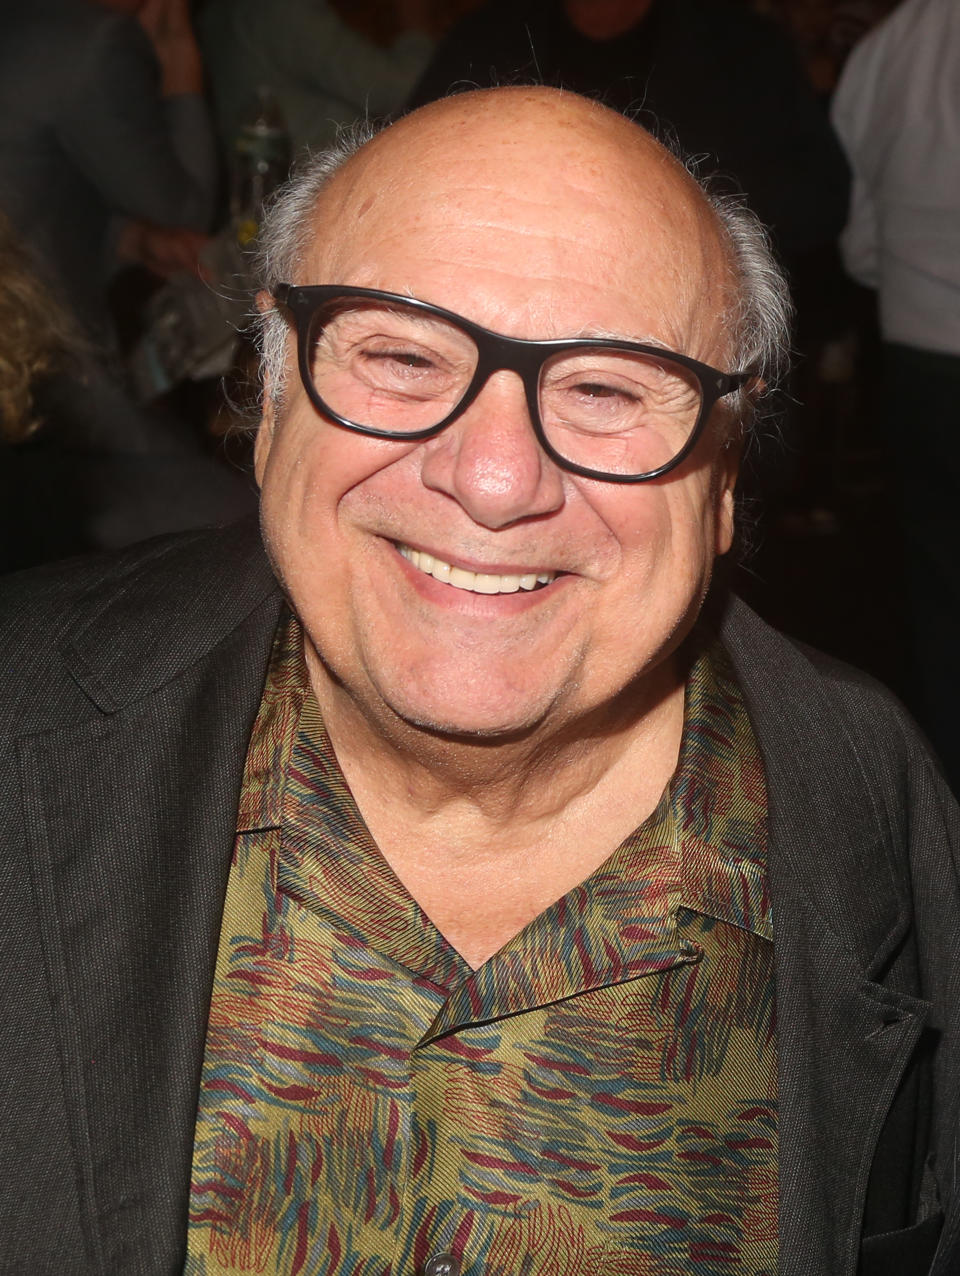 Danny DeVito at the opening night of Let's Call Her Patty